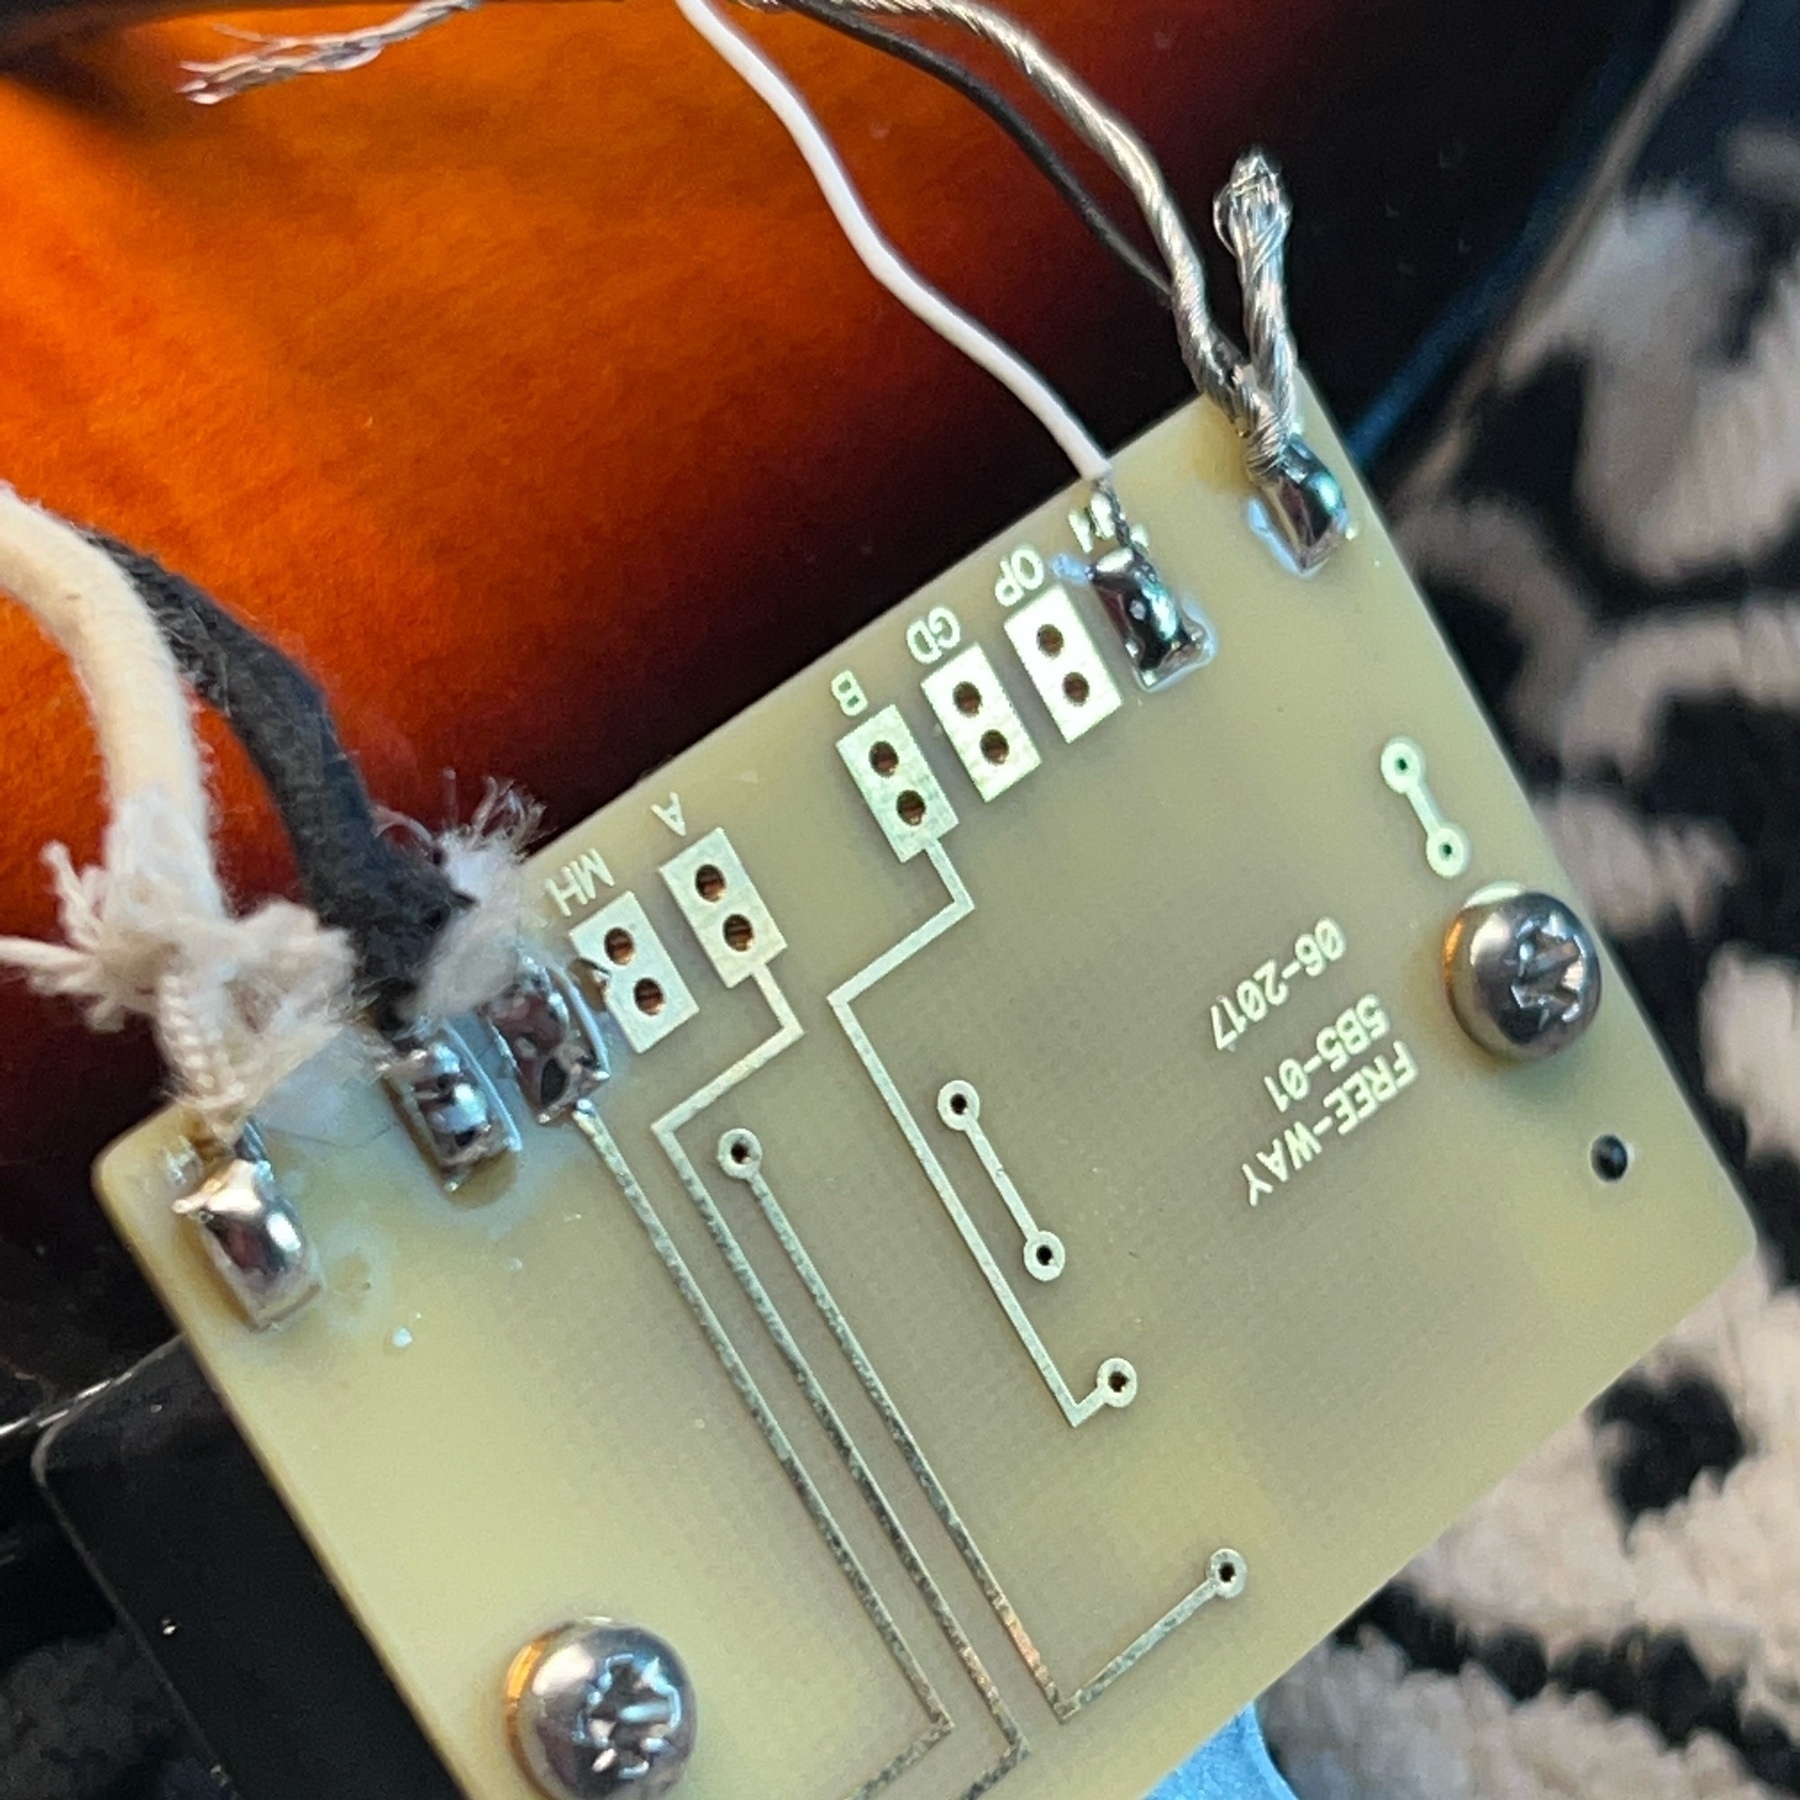 5-way guitar switch being wired up